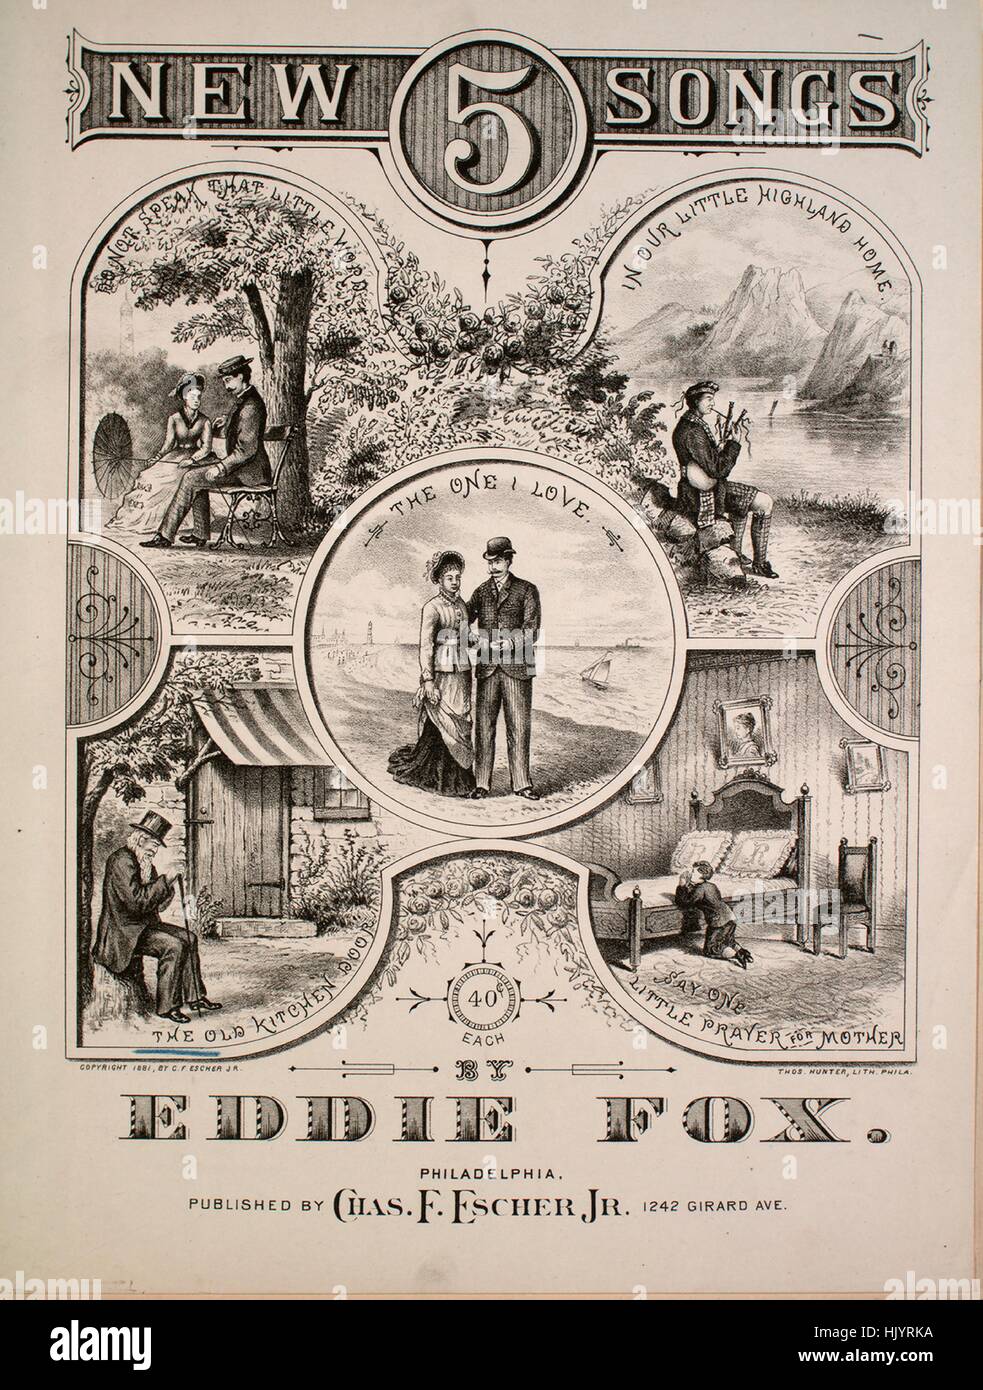 Sheet music cover image of the song '5 New Songs The Old Kitchen Door', with original authorship notes reading 'By Eddie Fox', United States, 1881. The publisher is listed as 'Chas. F. Escher, Jr., 1242 Girard Ave.', the form of composition is 'strophic with chorus', the instrumentation is 'piano and voice', the first line reads 'Yes, it swingeth on its hinges as it did in days of yore', and the illustration artist is listed as 'Thos. Hunter, Lith. Phila.'. Stock Photo